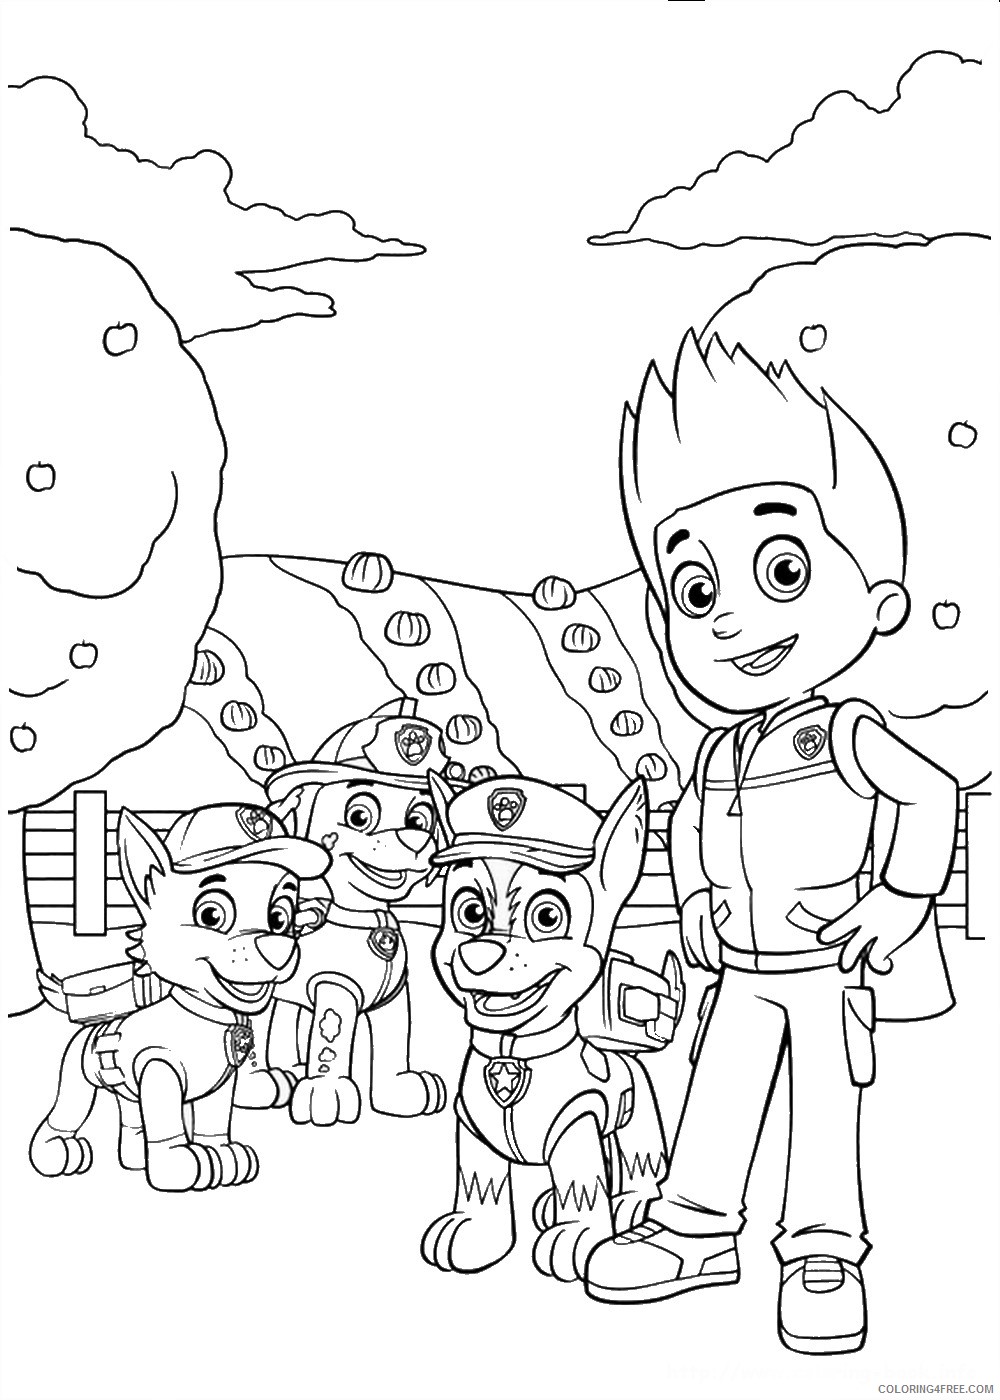 ryder and paw patrol coloring pages Coloring4free